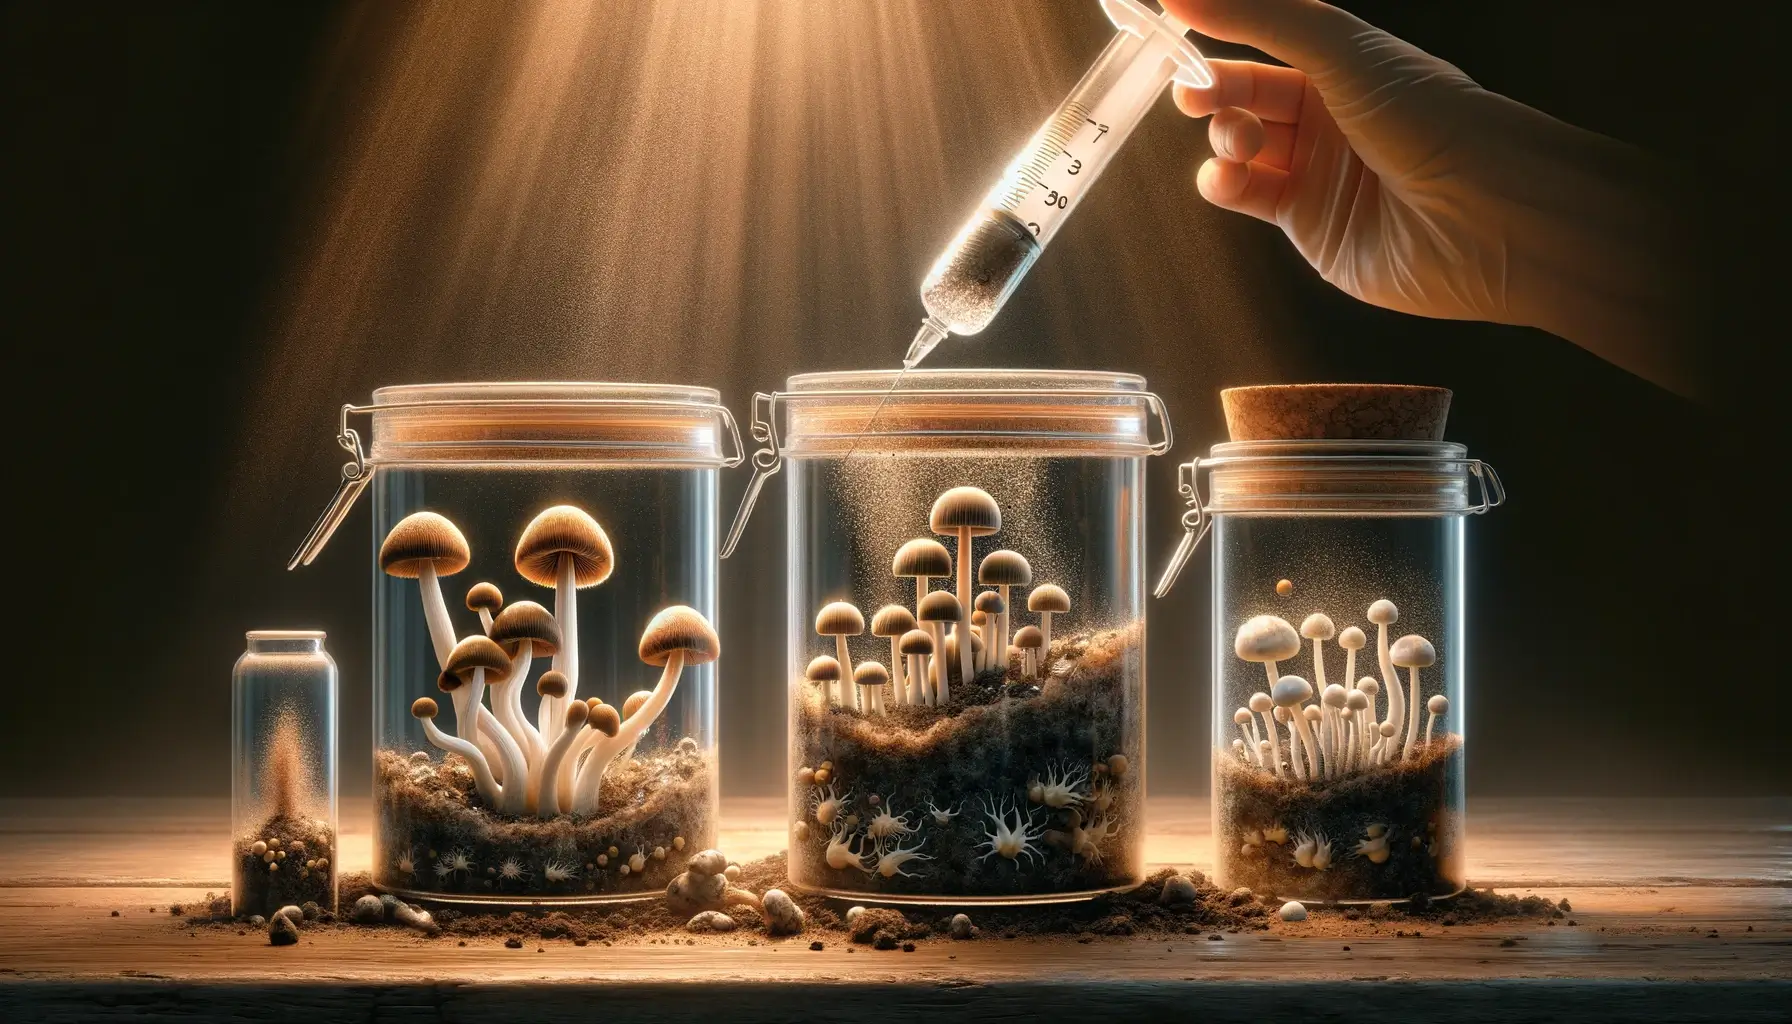 Step-by-step visualization of mushroom spore germination, from inoculation to initial mushroom growth, in a natural setting.